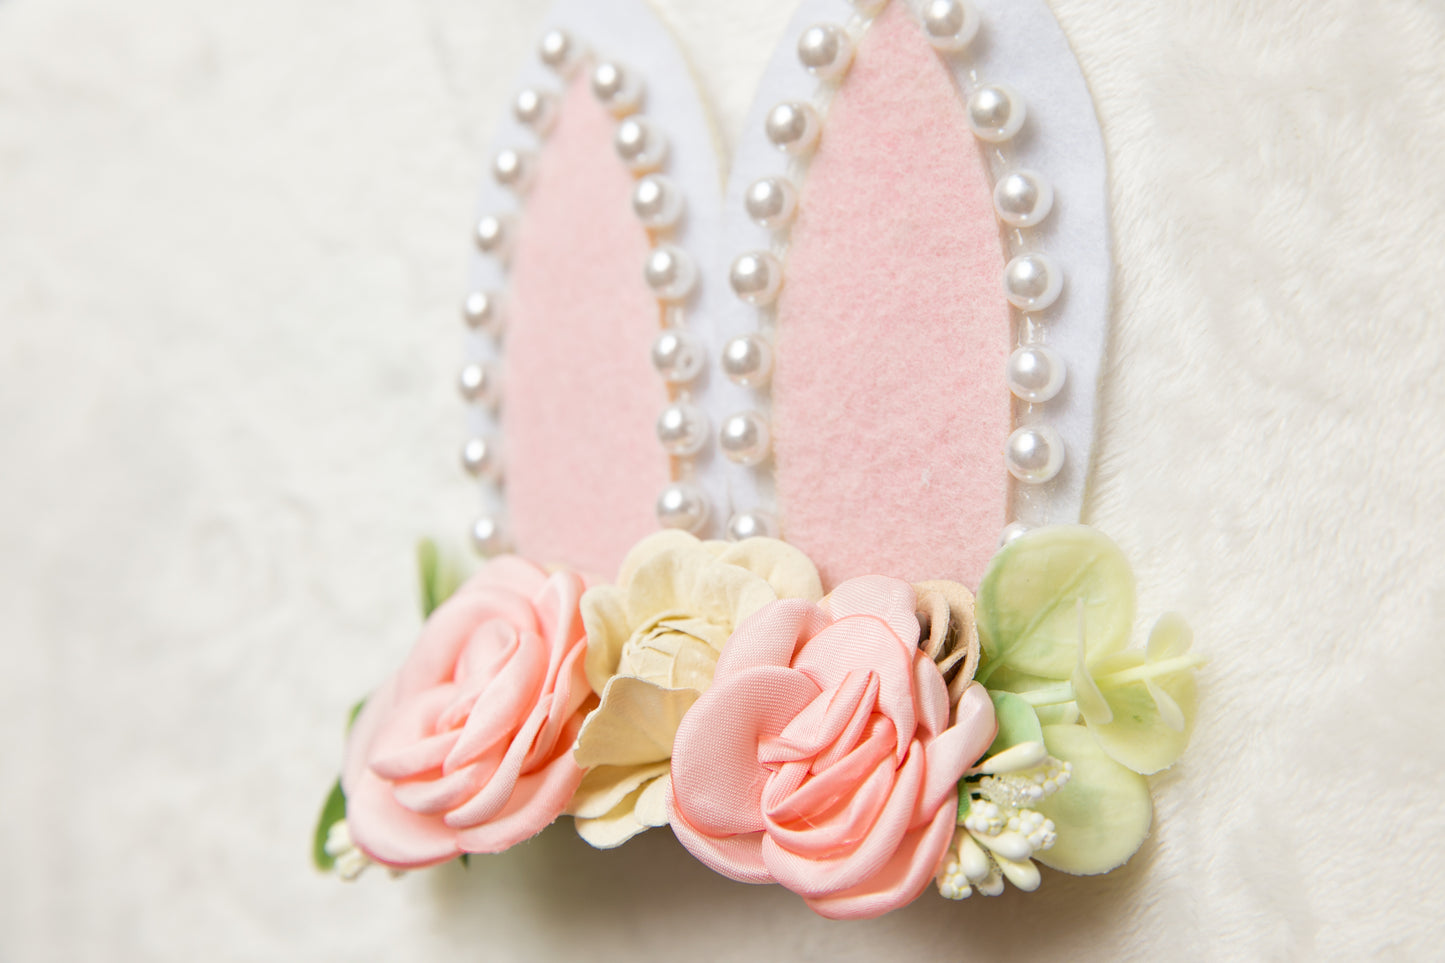 Unique Easter Bunny Ears 5 inches Extra Large headband for Baby Girl Toddler Pink Beige Pearl Easter Egg Big flower floral party gift